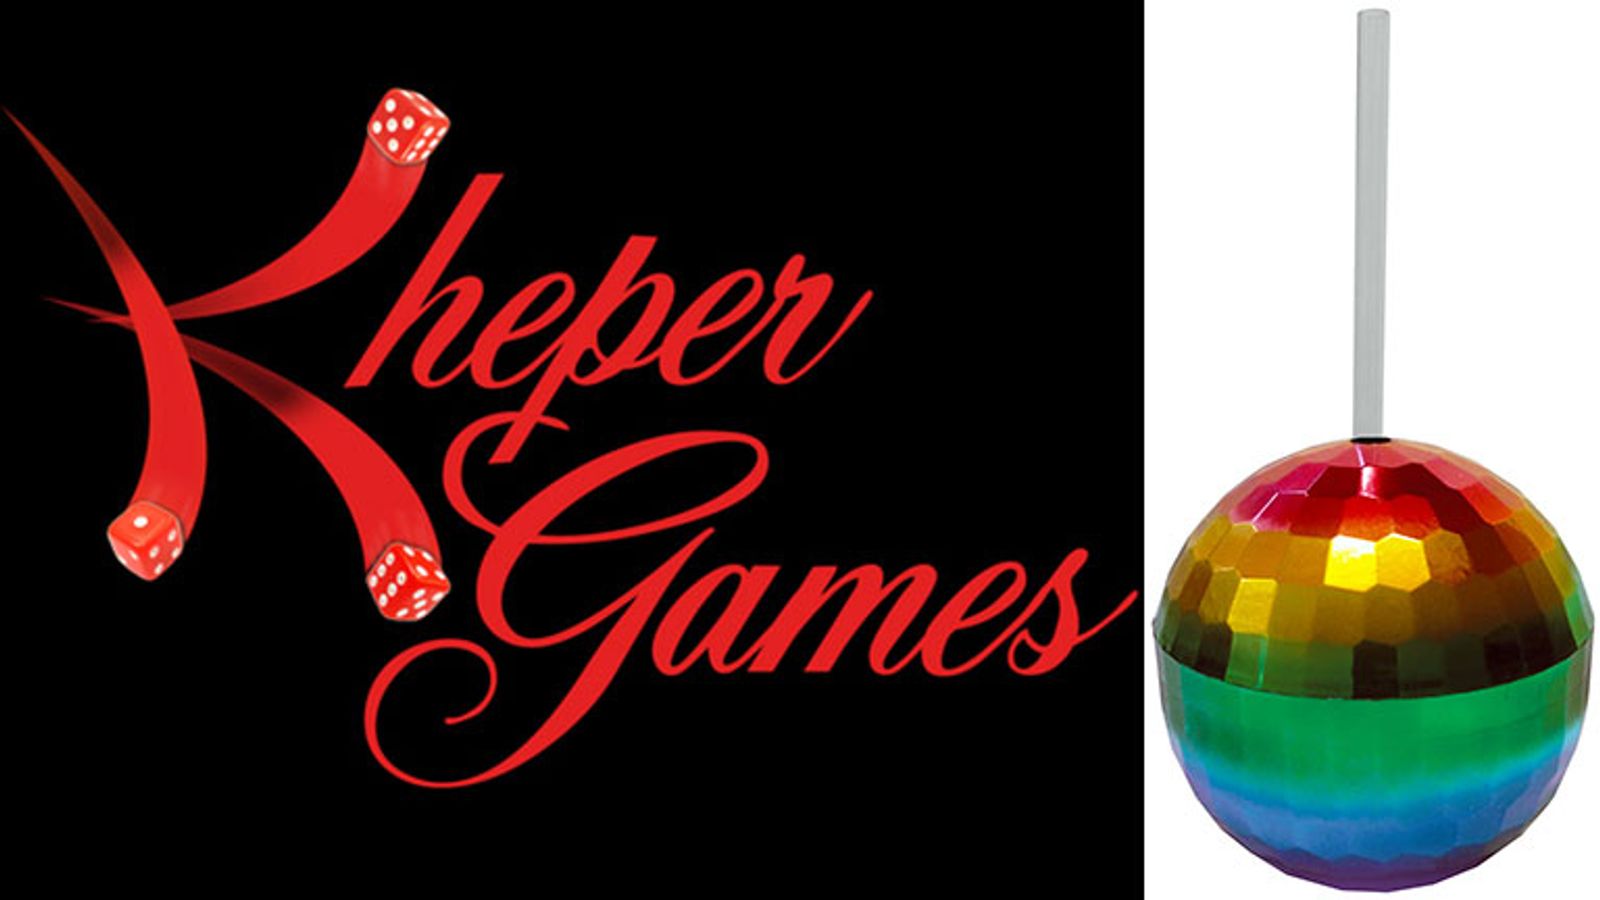 Kheper Games Adds Rainbow Version to Its Silver Disco Ball Cup